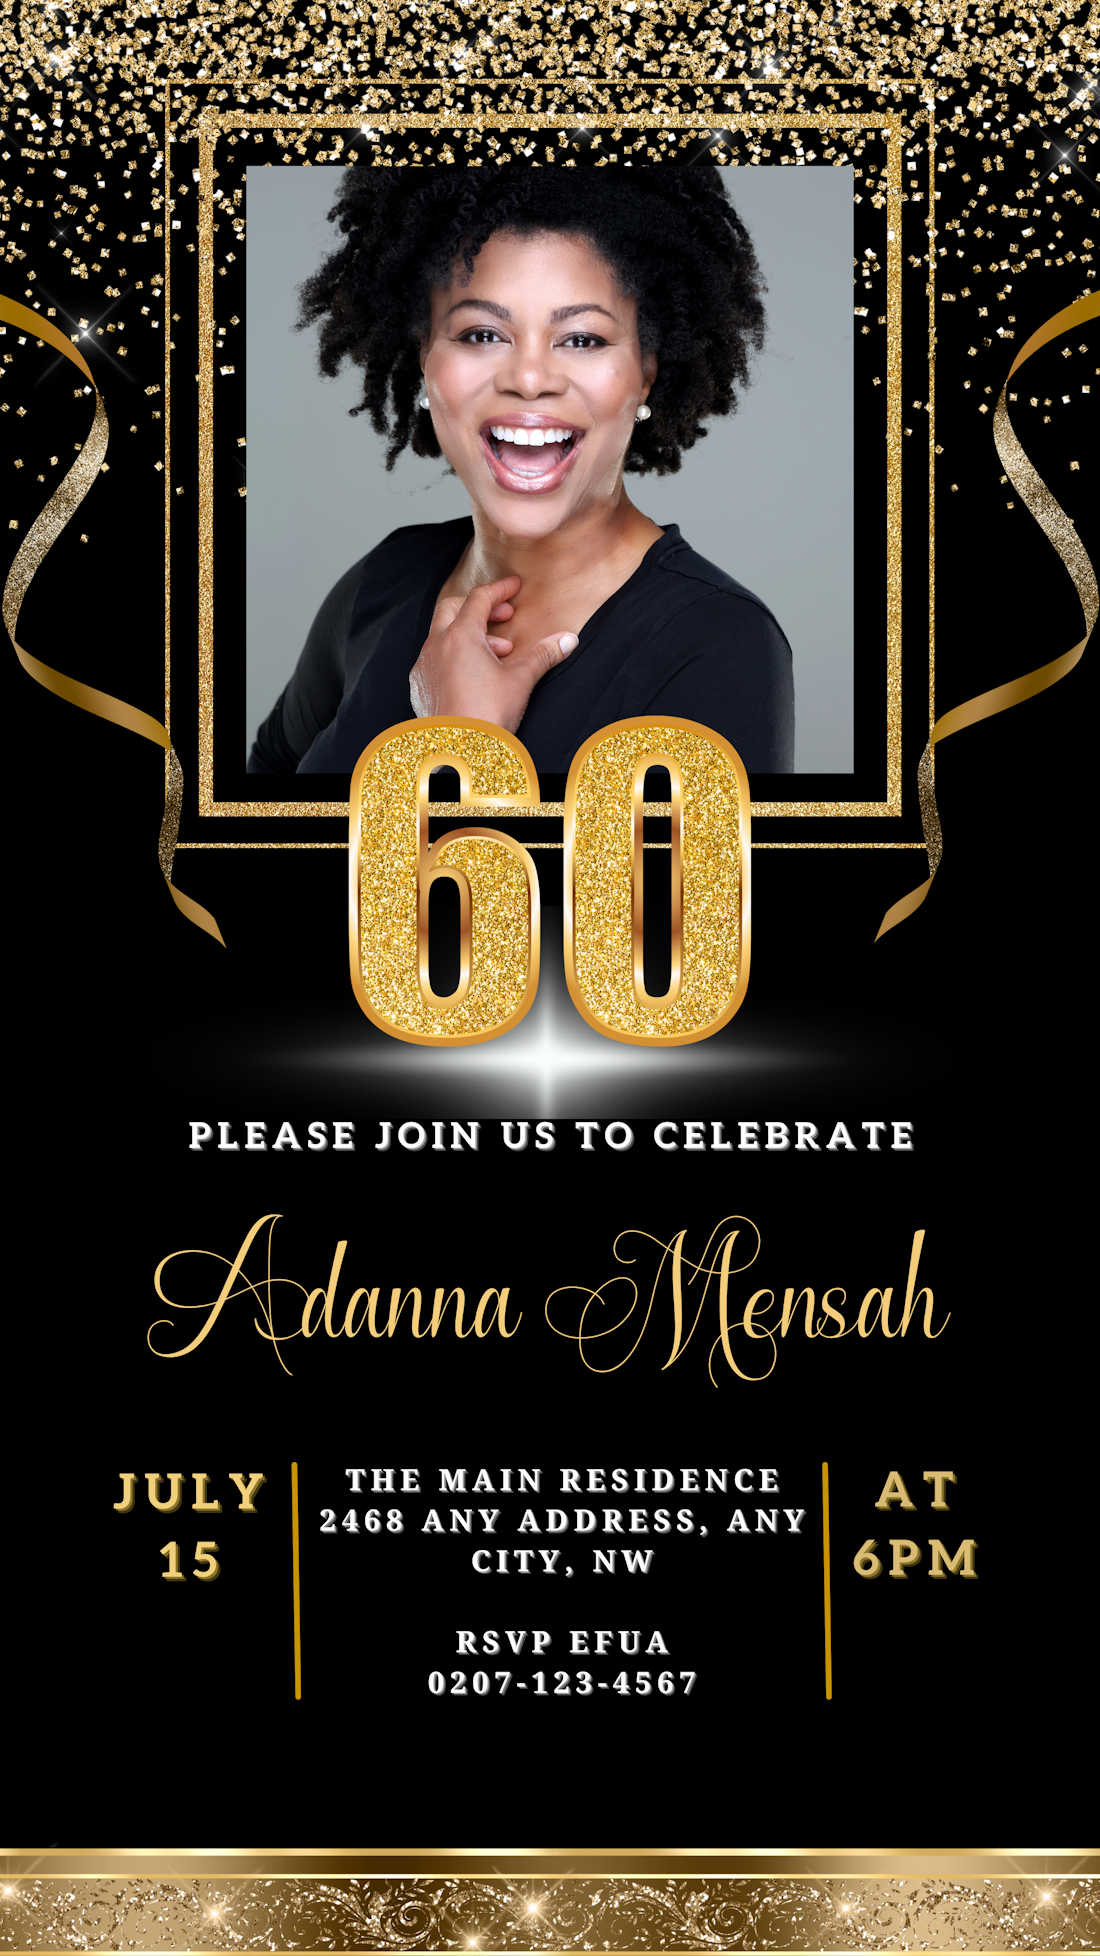 Black Gold Confetti 60th Birthday Evite features a smiling woman on a customizable digital invitation with gold text, designed for easy personalization via Canva.